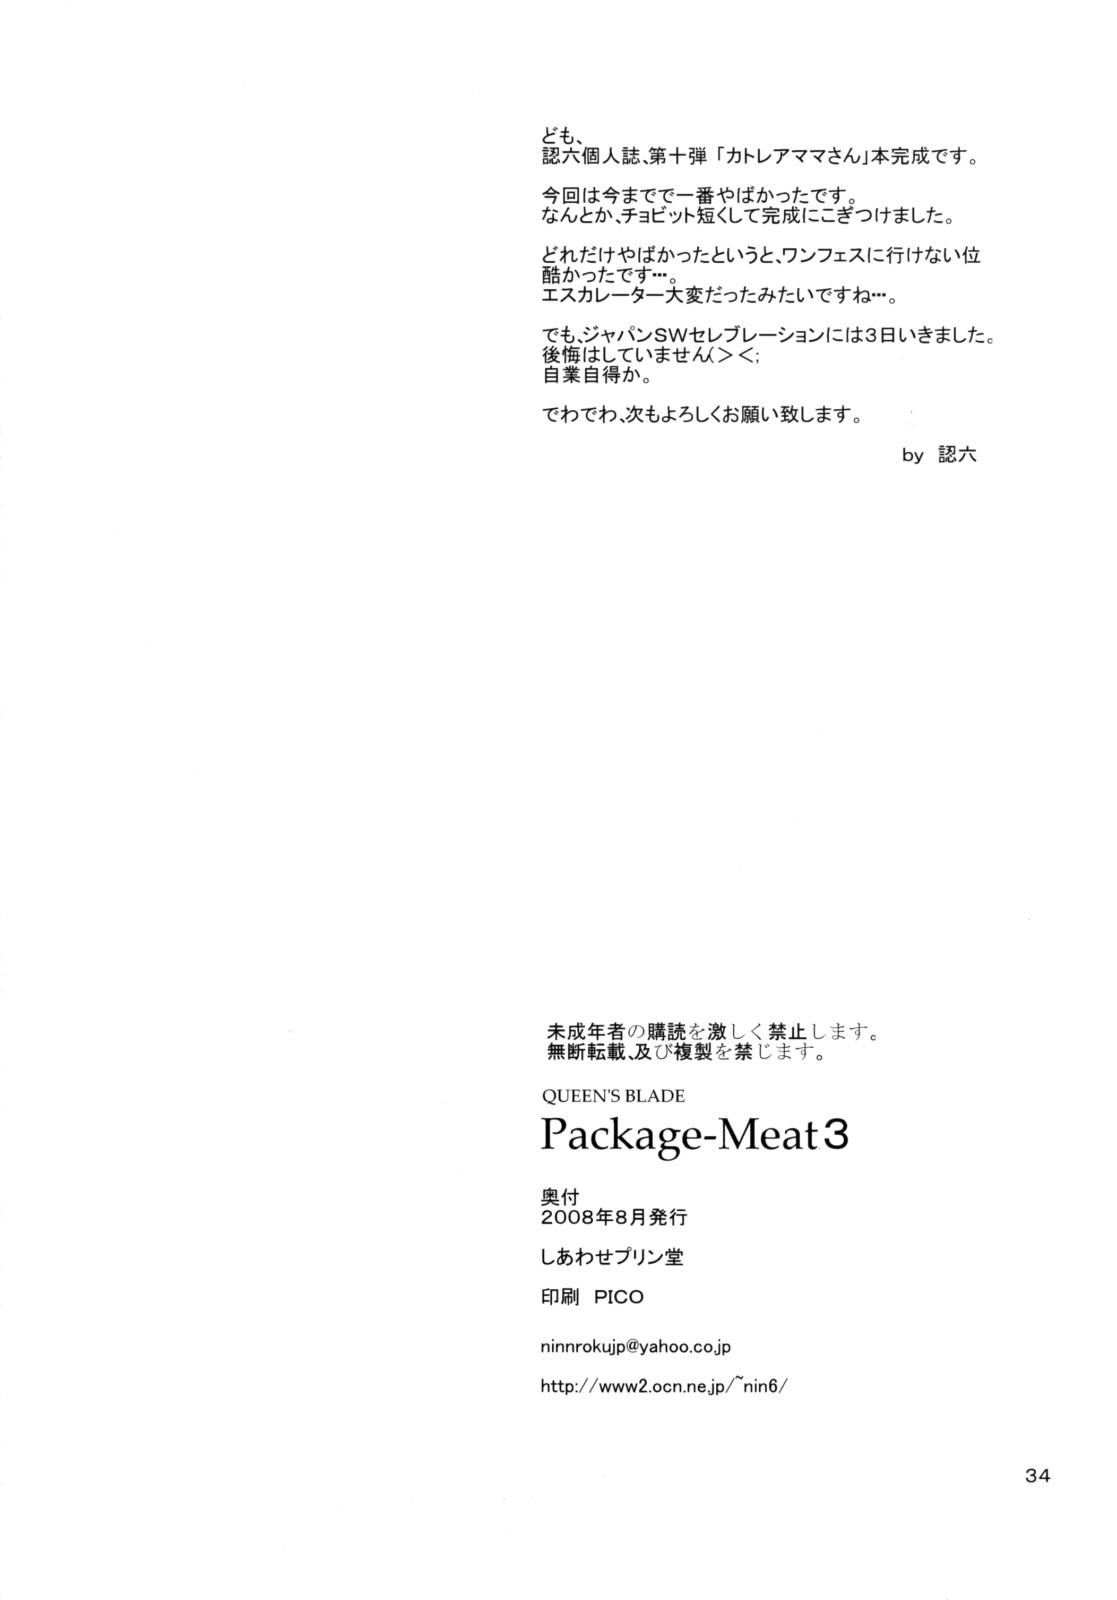 Package-Meat 3 32